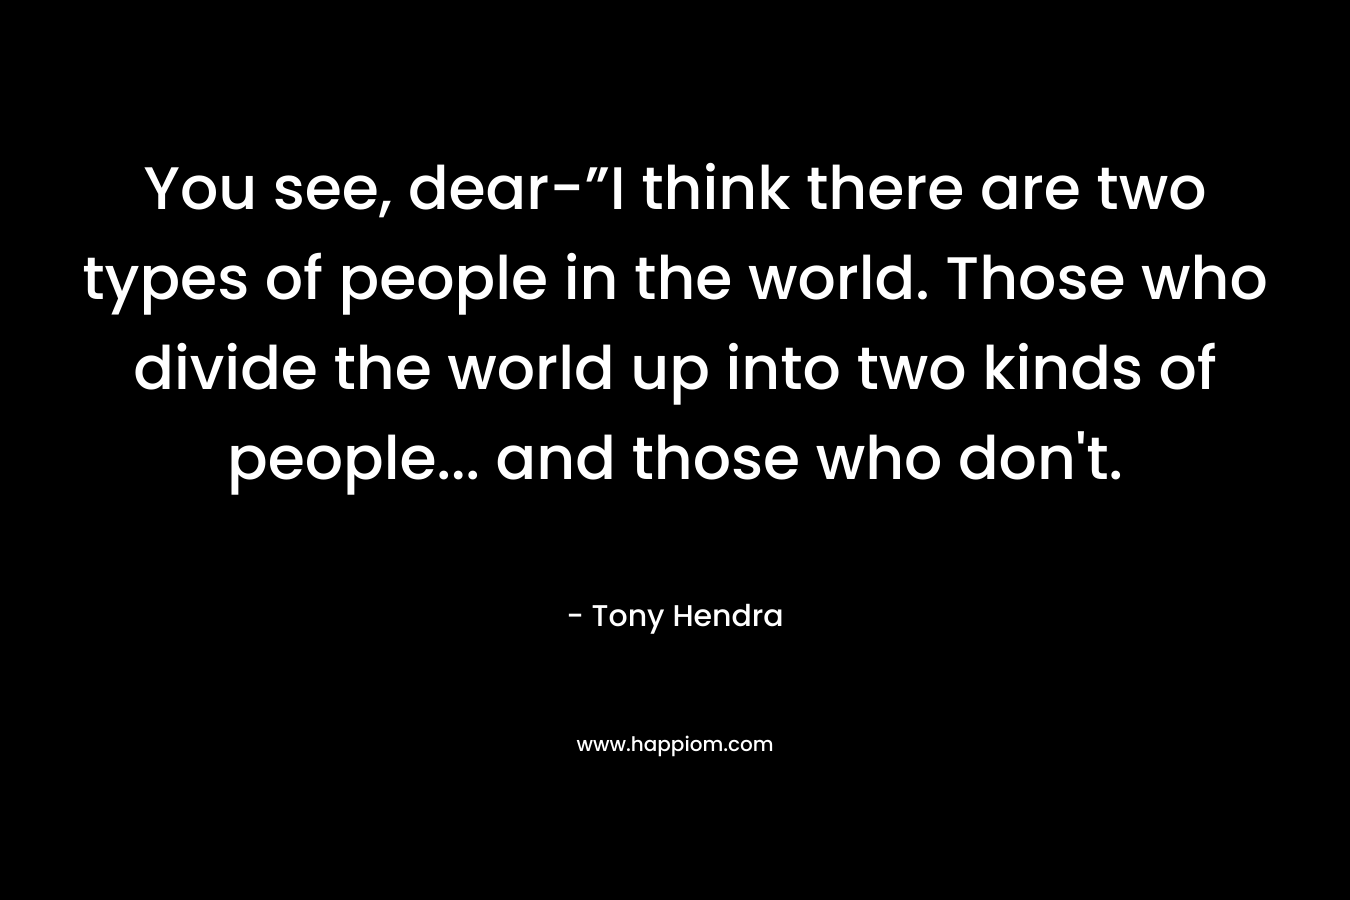 You see, dear-”I think there are two types of people in the world. Those who divide the world up into two kinds of people… and those who don’t. – Tony Hendra